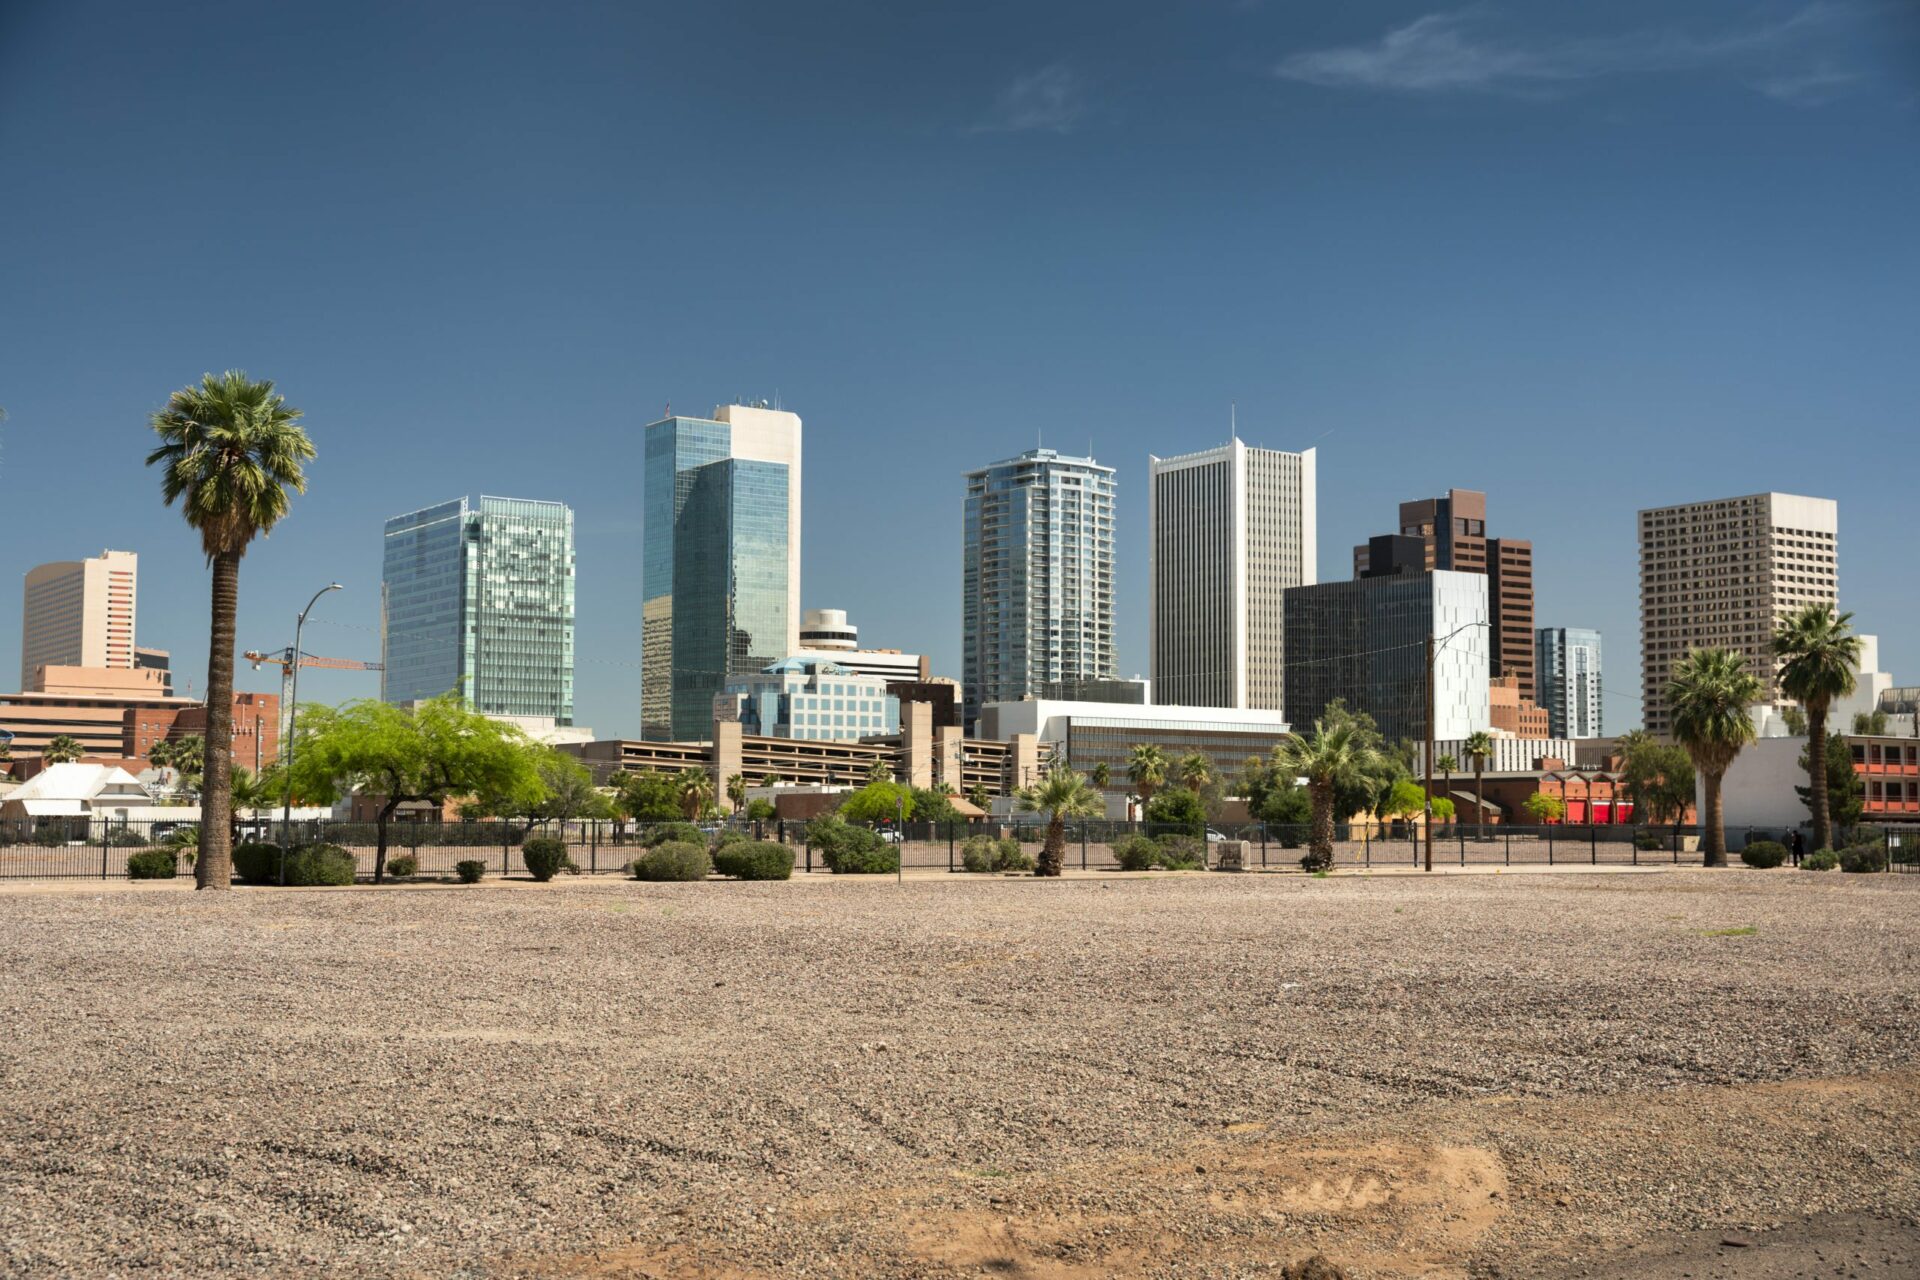 Cityscape skyline view of office buildings and apartment condominiums in downtown Phoenix Arizona USA